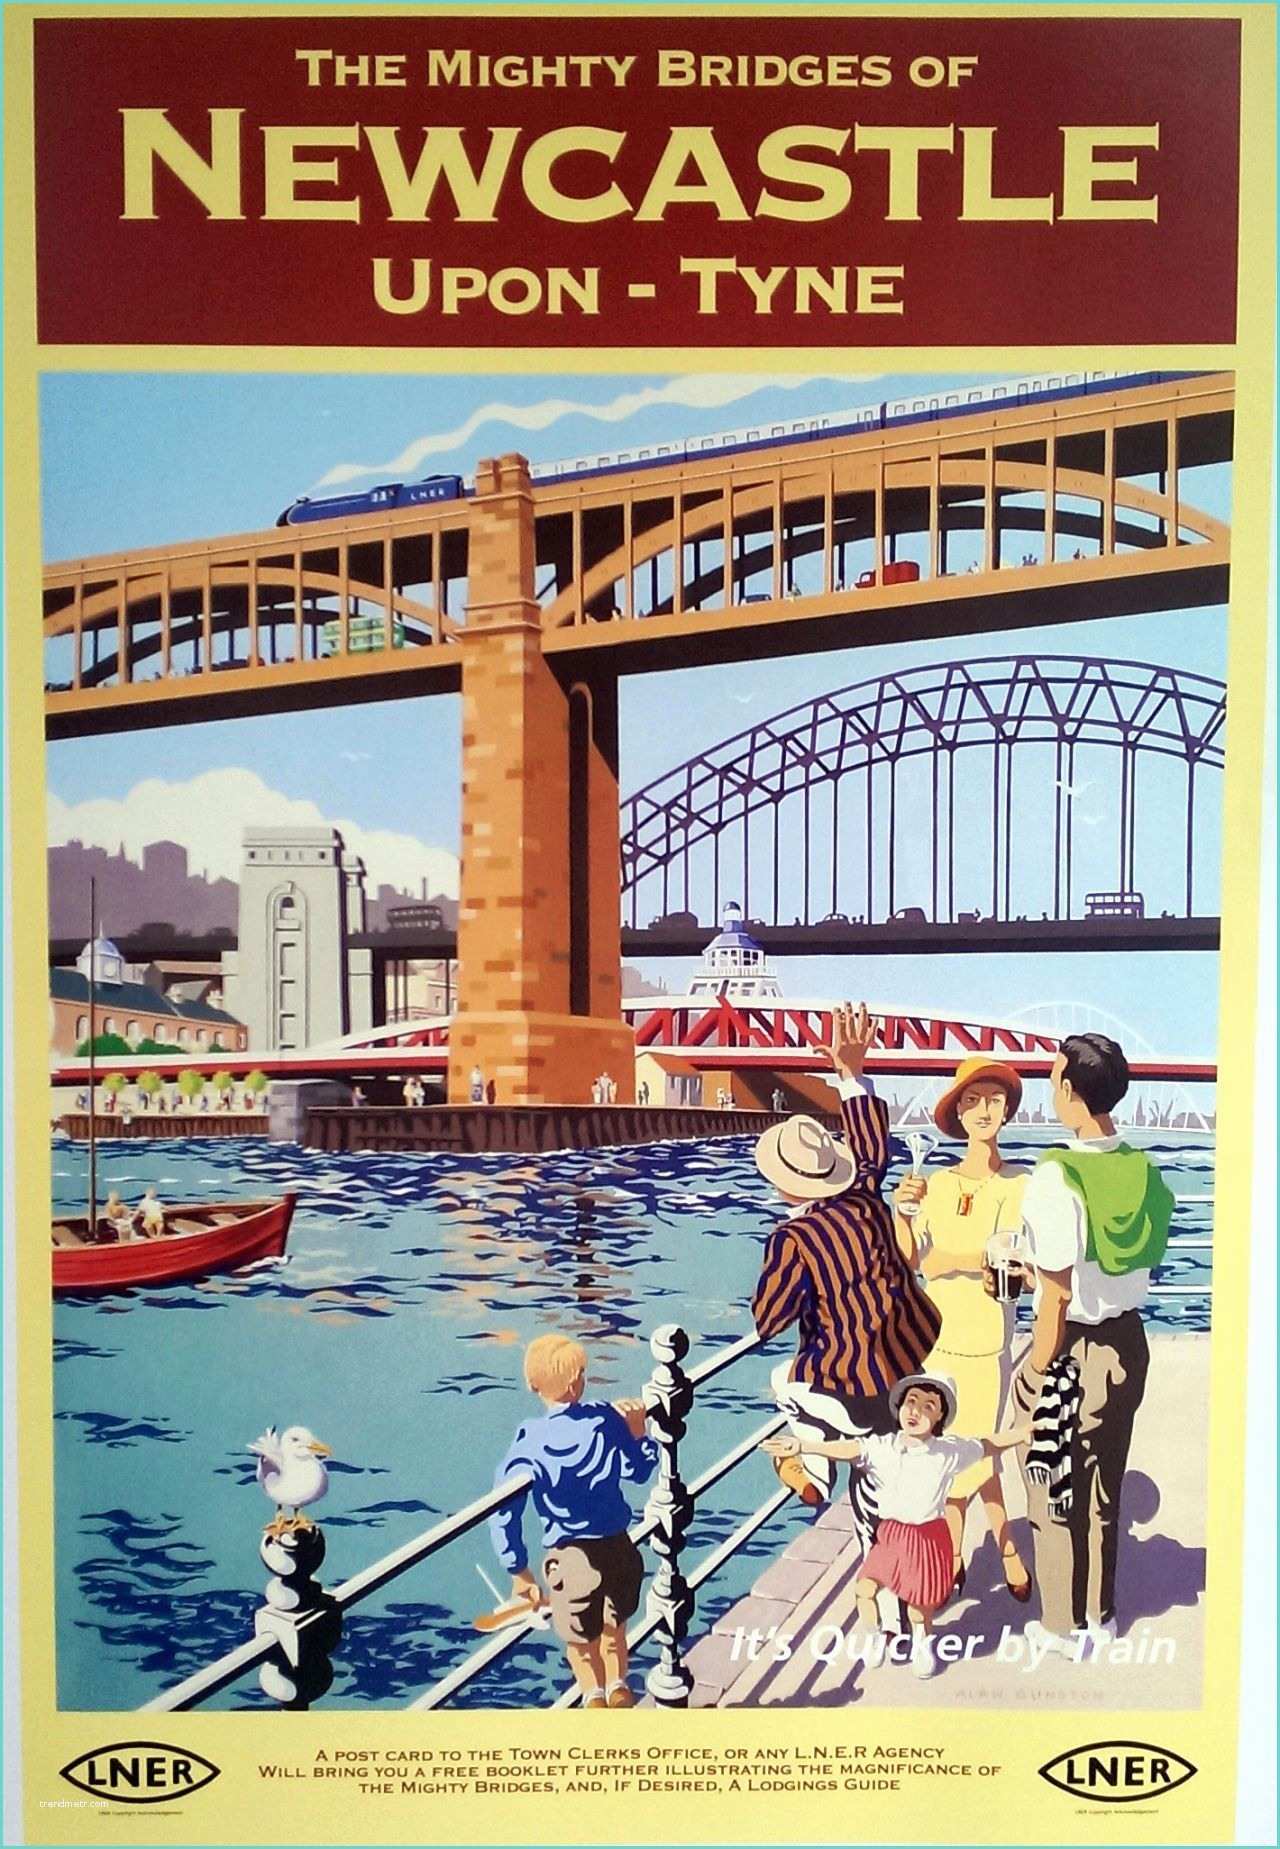 Allposters Return Policy Image Result for Poster the Mighty Bridges Of Newcastle On Tyne Lner